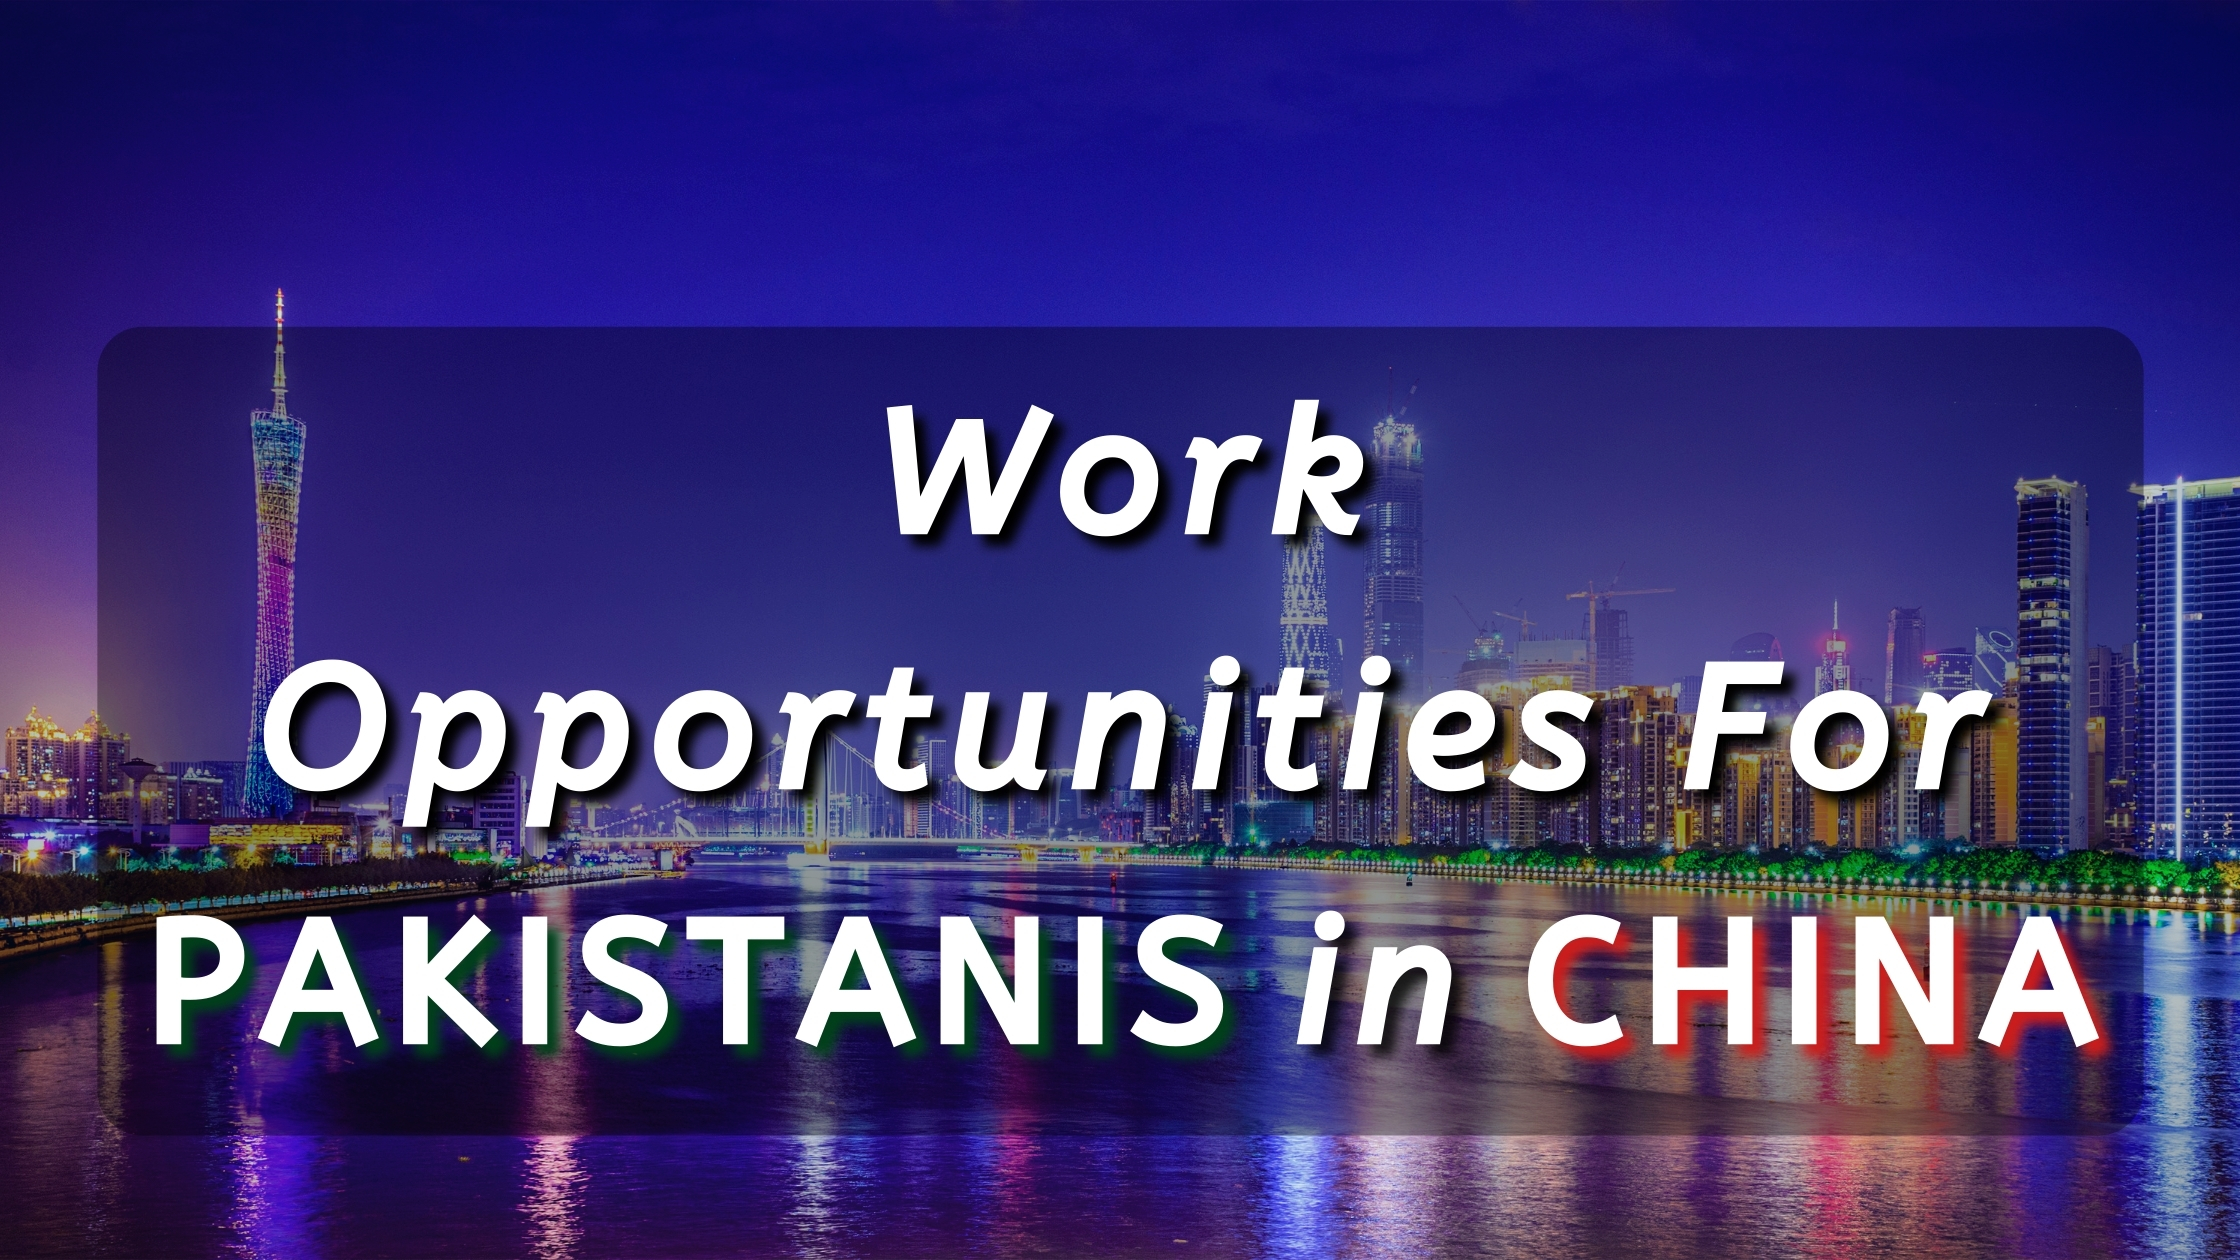 Work Opportunities for Pakistanis in China